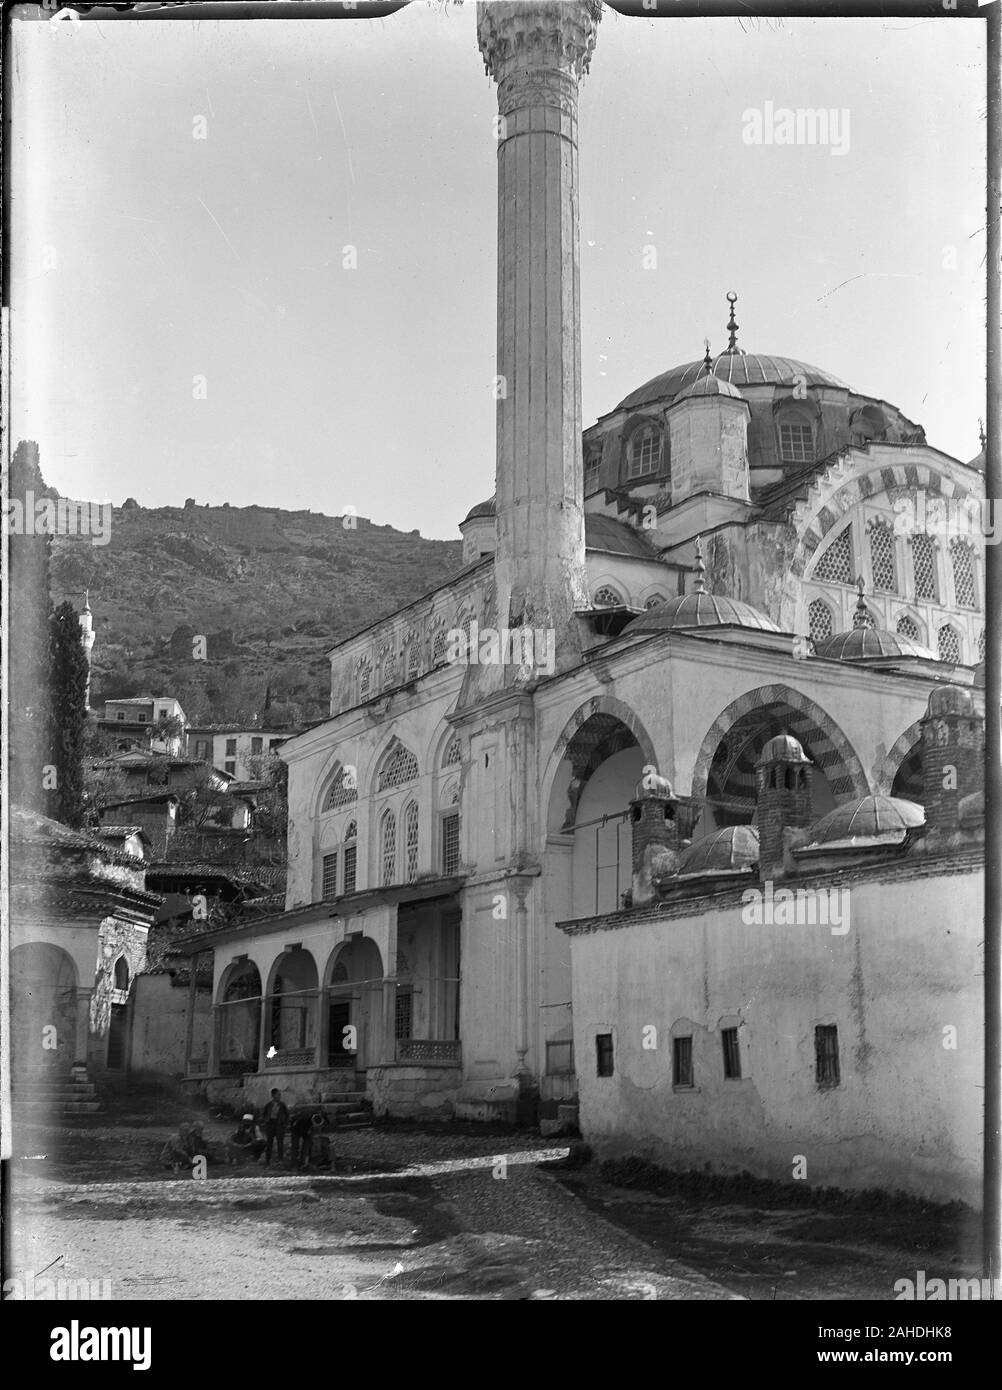 Manisa, Muradiye Külliyesi mosque, street view with a group of natives sitting in the road near the entrance. Muradiye mosque was built by Mimar Sinan in the late 16. century. Manisa is located in the western part of Turkey. Photography taken in the 1910s on dry glass plate, part of the Herry W. Schaefer Ottoman collection. Stock Photo